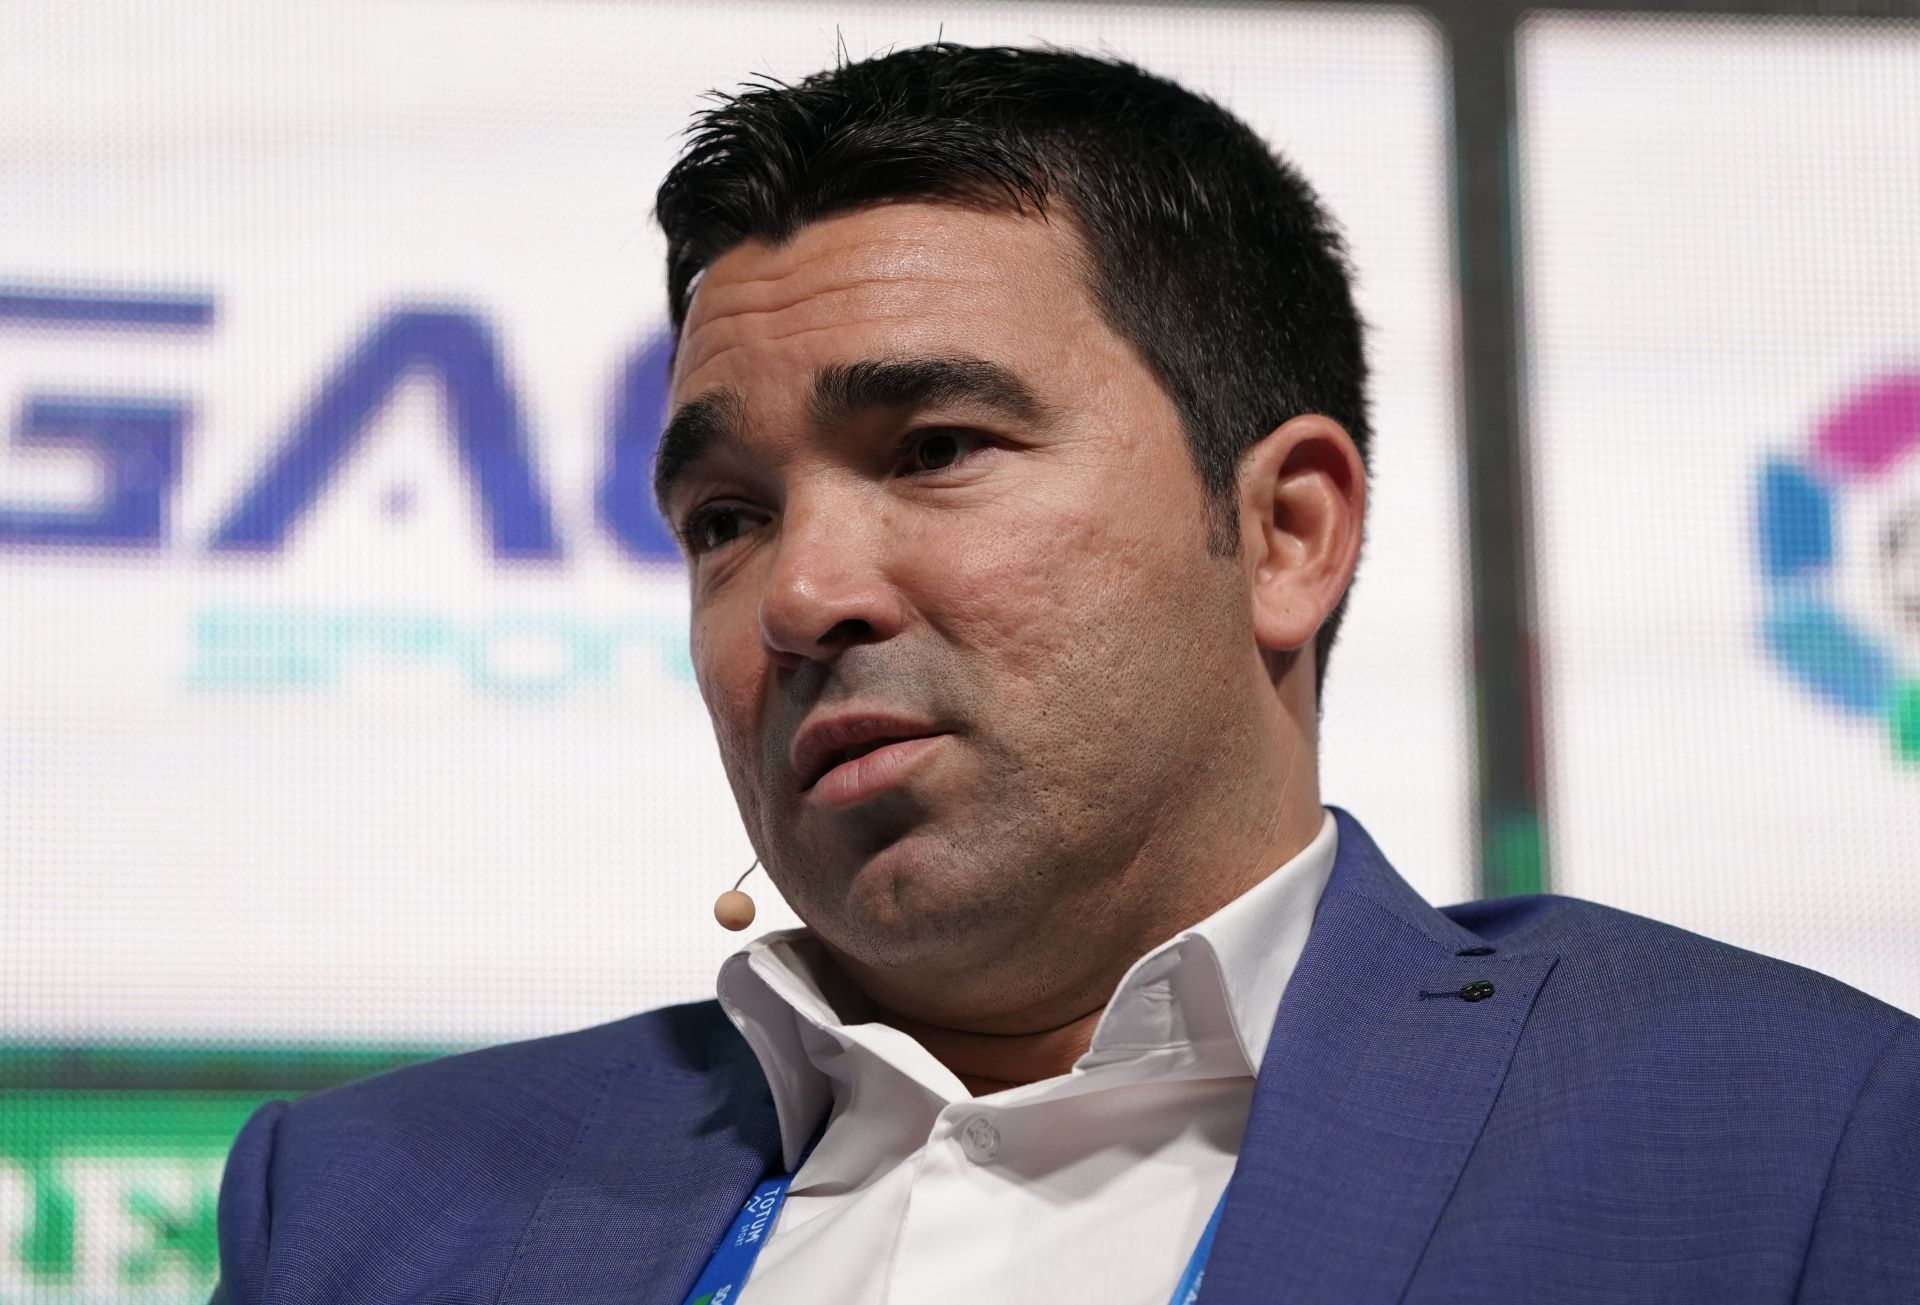 Deco touched on Manchester United targets Ronald Araujo and Frenkie de Jong&#039;s situations.